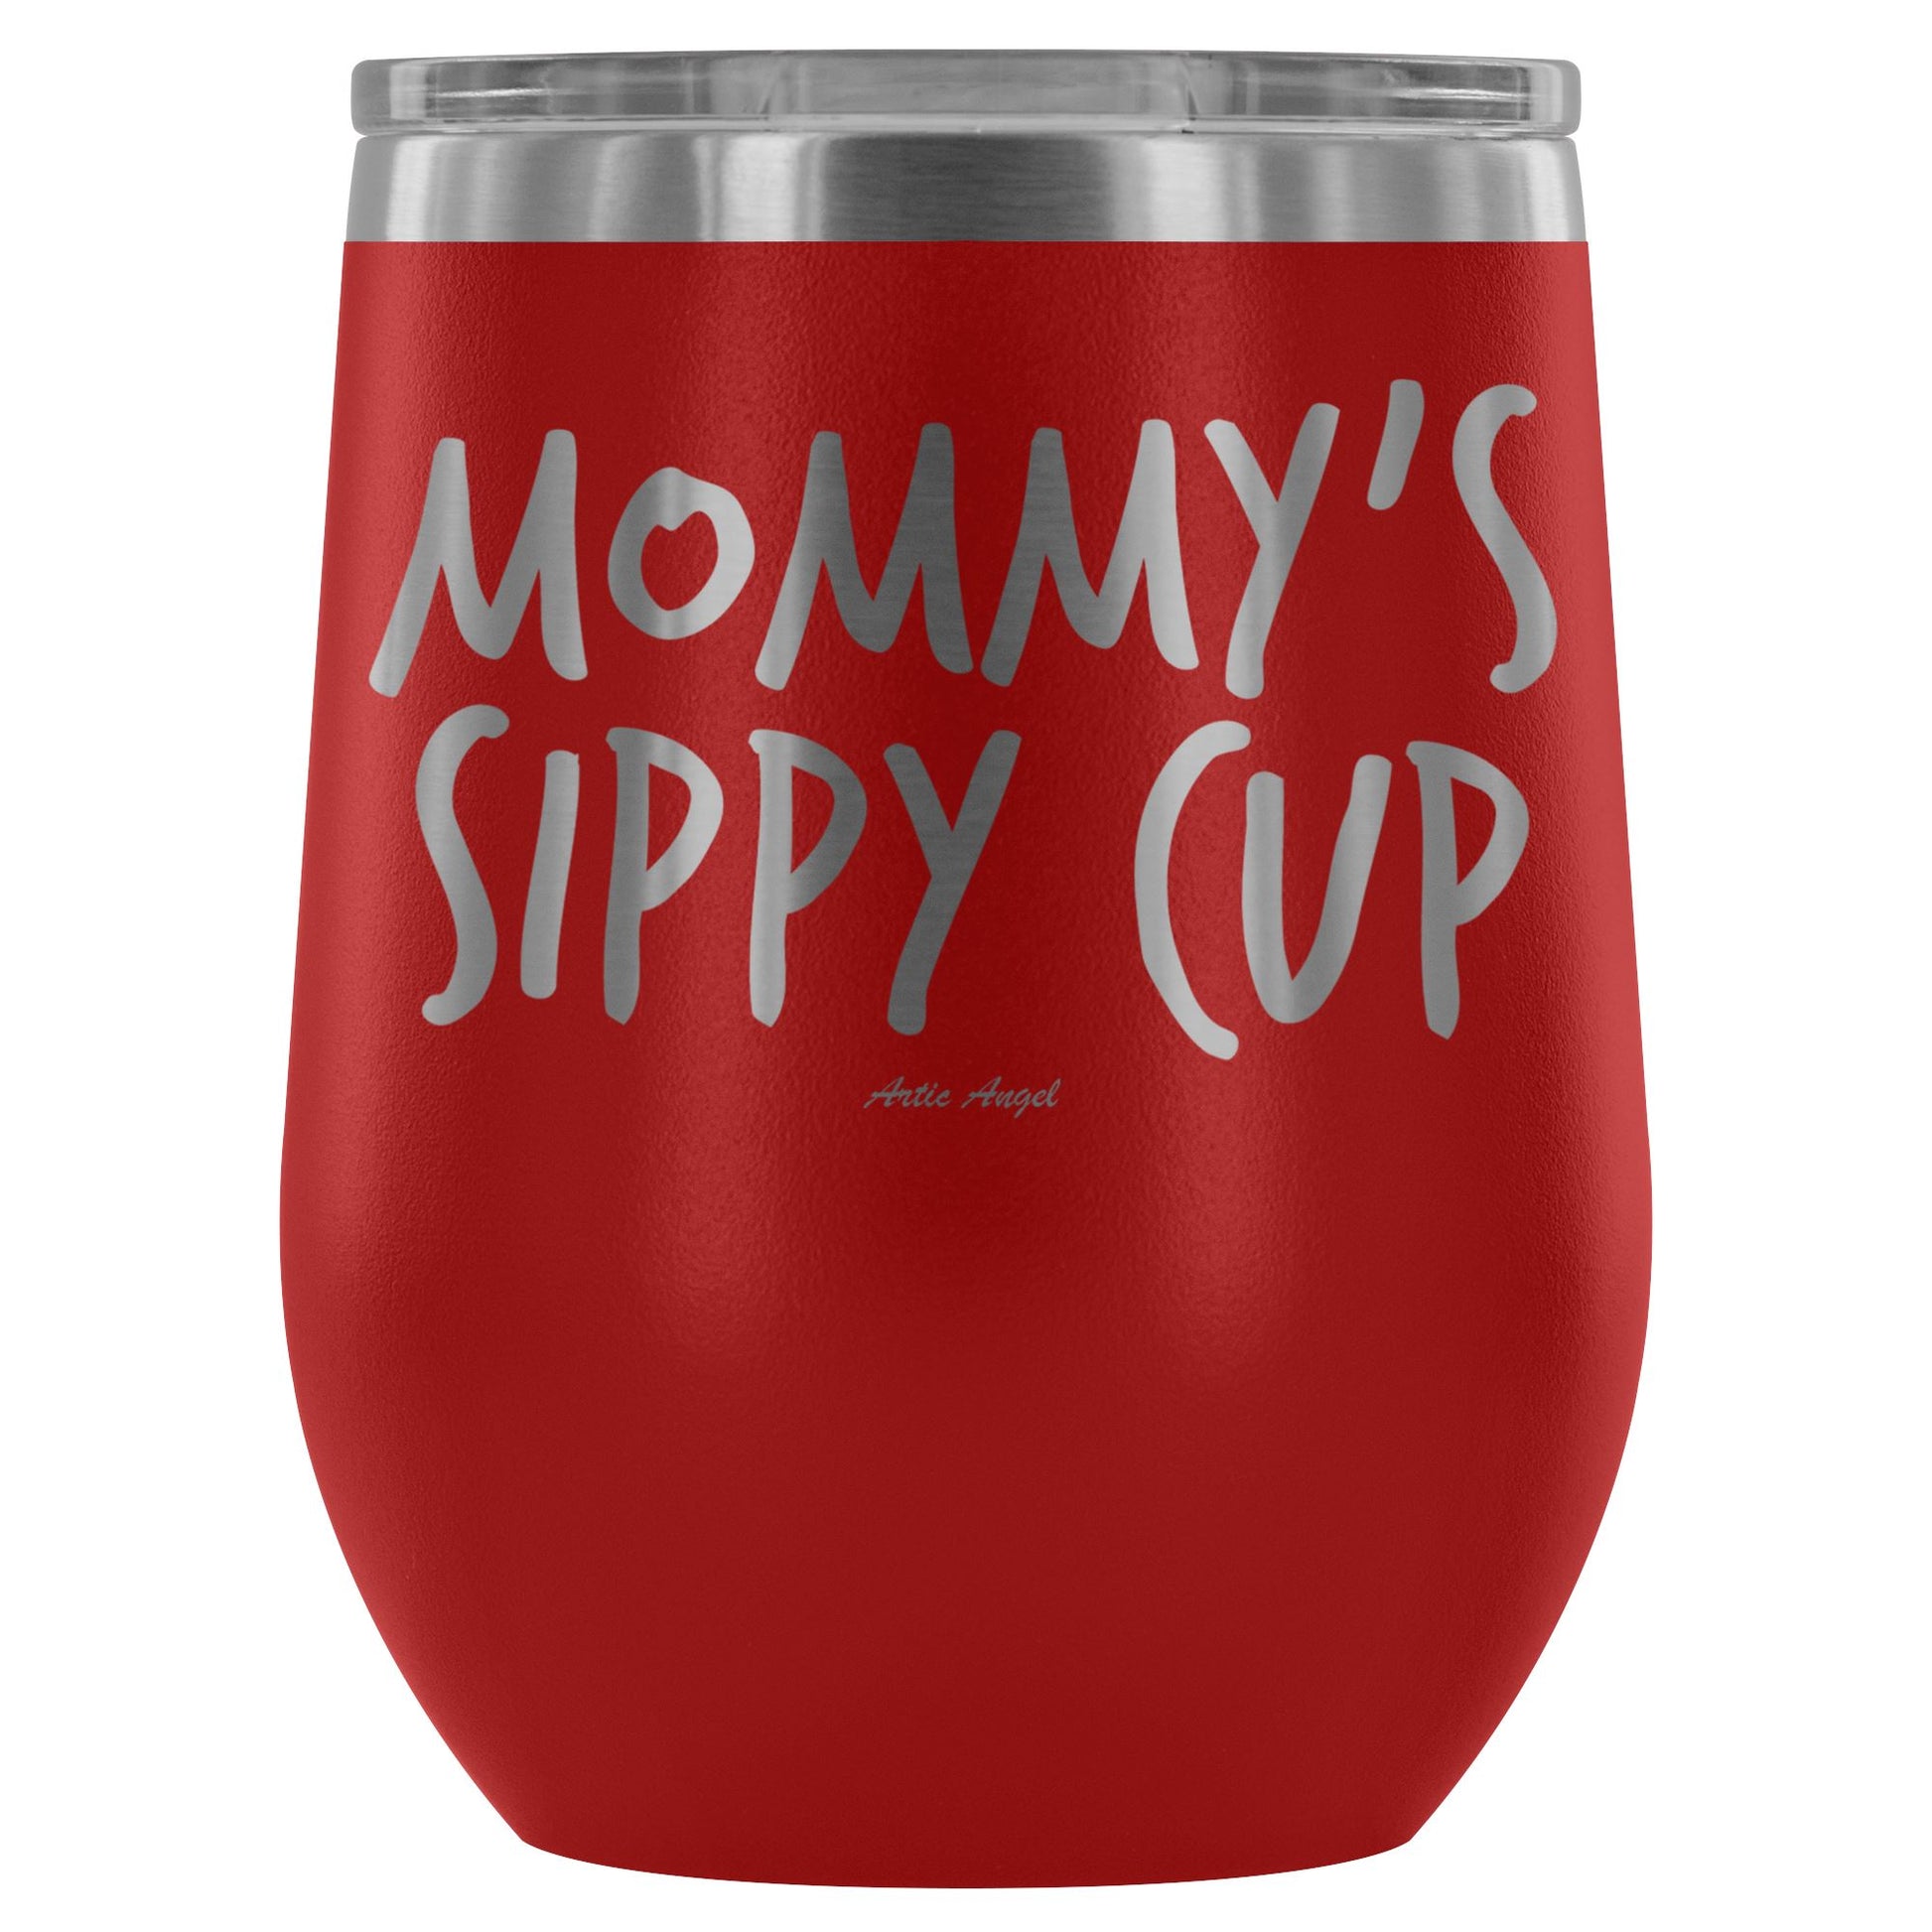 "Mommy's Sippy Cup" - Stemless Wine Cup Wine Tumbler Red 